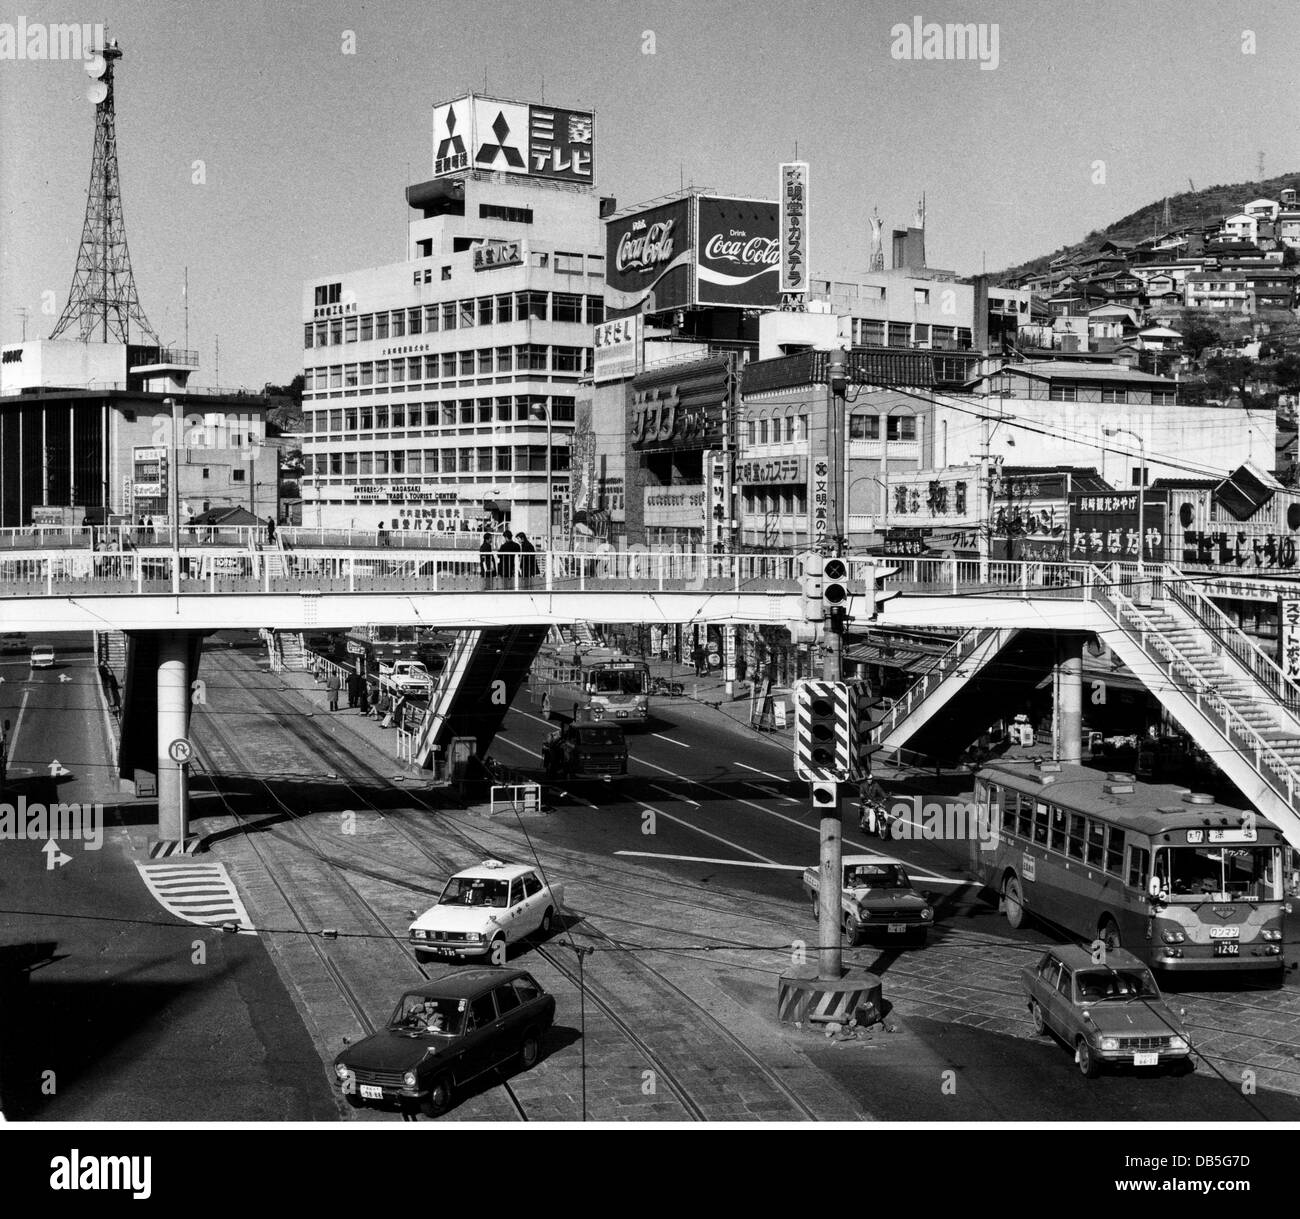 geography / travel, Japan, Nagasaki, street scenes, street scene at the railway station, 1971, Additional-Rights-Clearences-Not Available Stock Photo